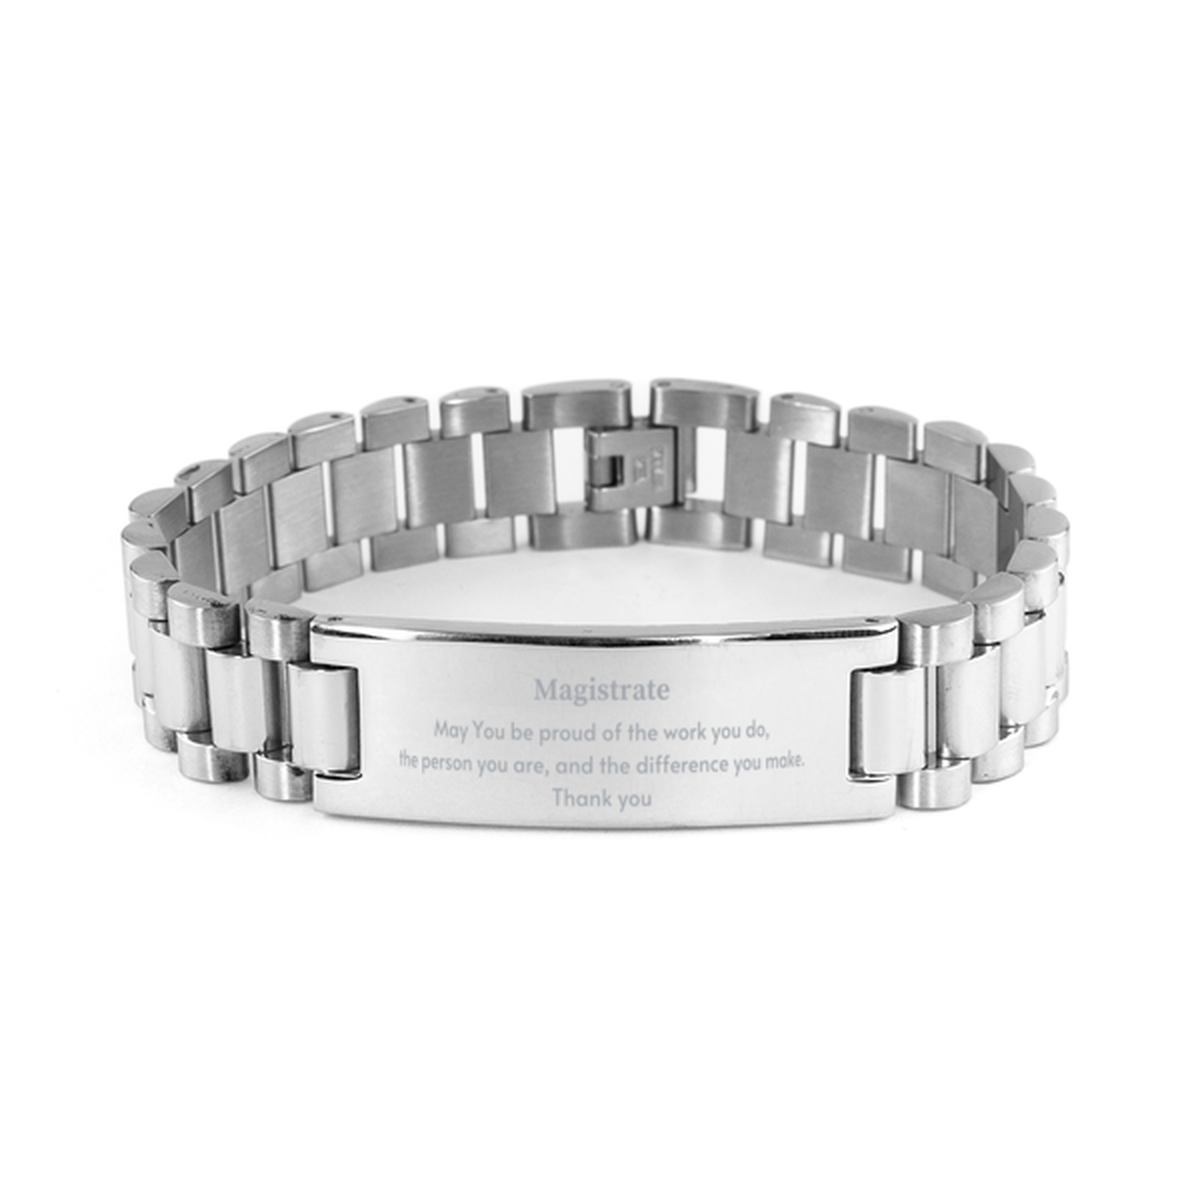 Heartwarming Ladder Stainless Steel Bracelet Retirement Coworkers Gifts for Magistrate, Magistrate May You be proud of the work you do, the person you are Gifts for Boss Men Women Friends